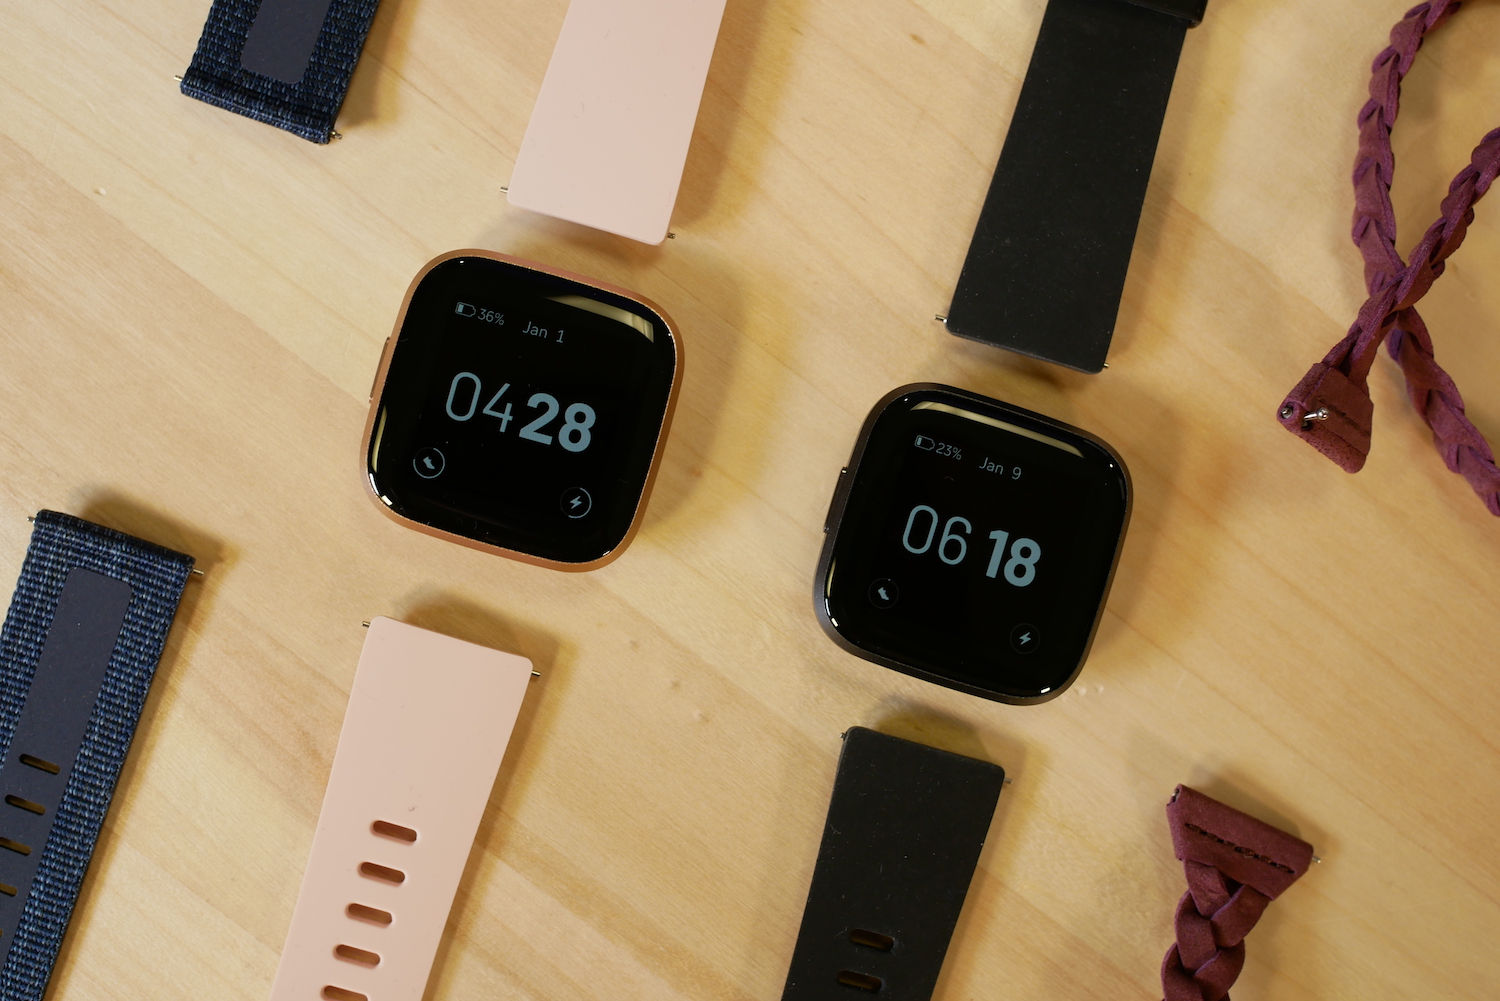 Fitbit Versa 2 Review - Best Features of the $199 Smartwatch